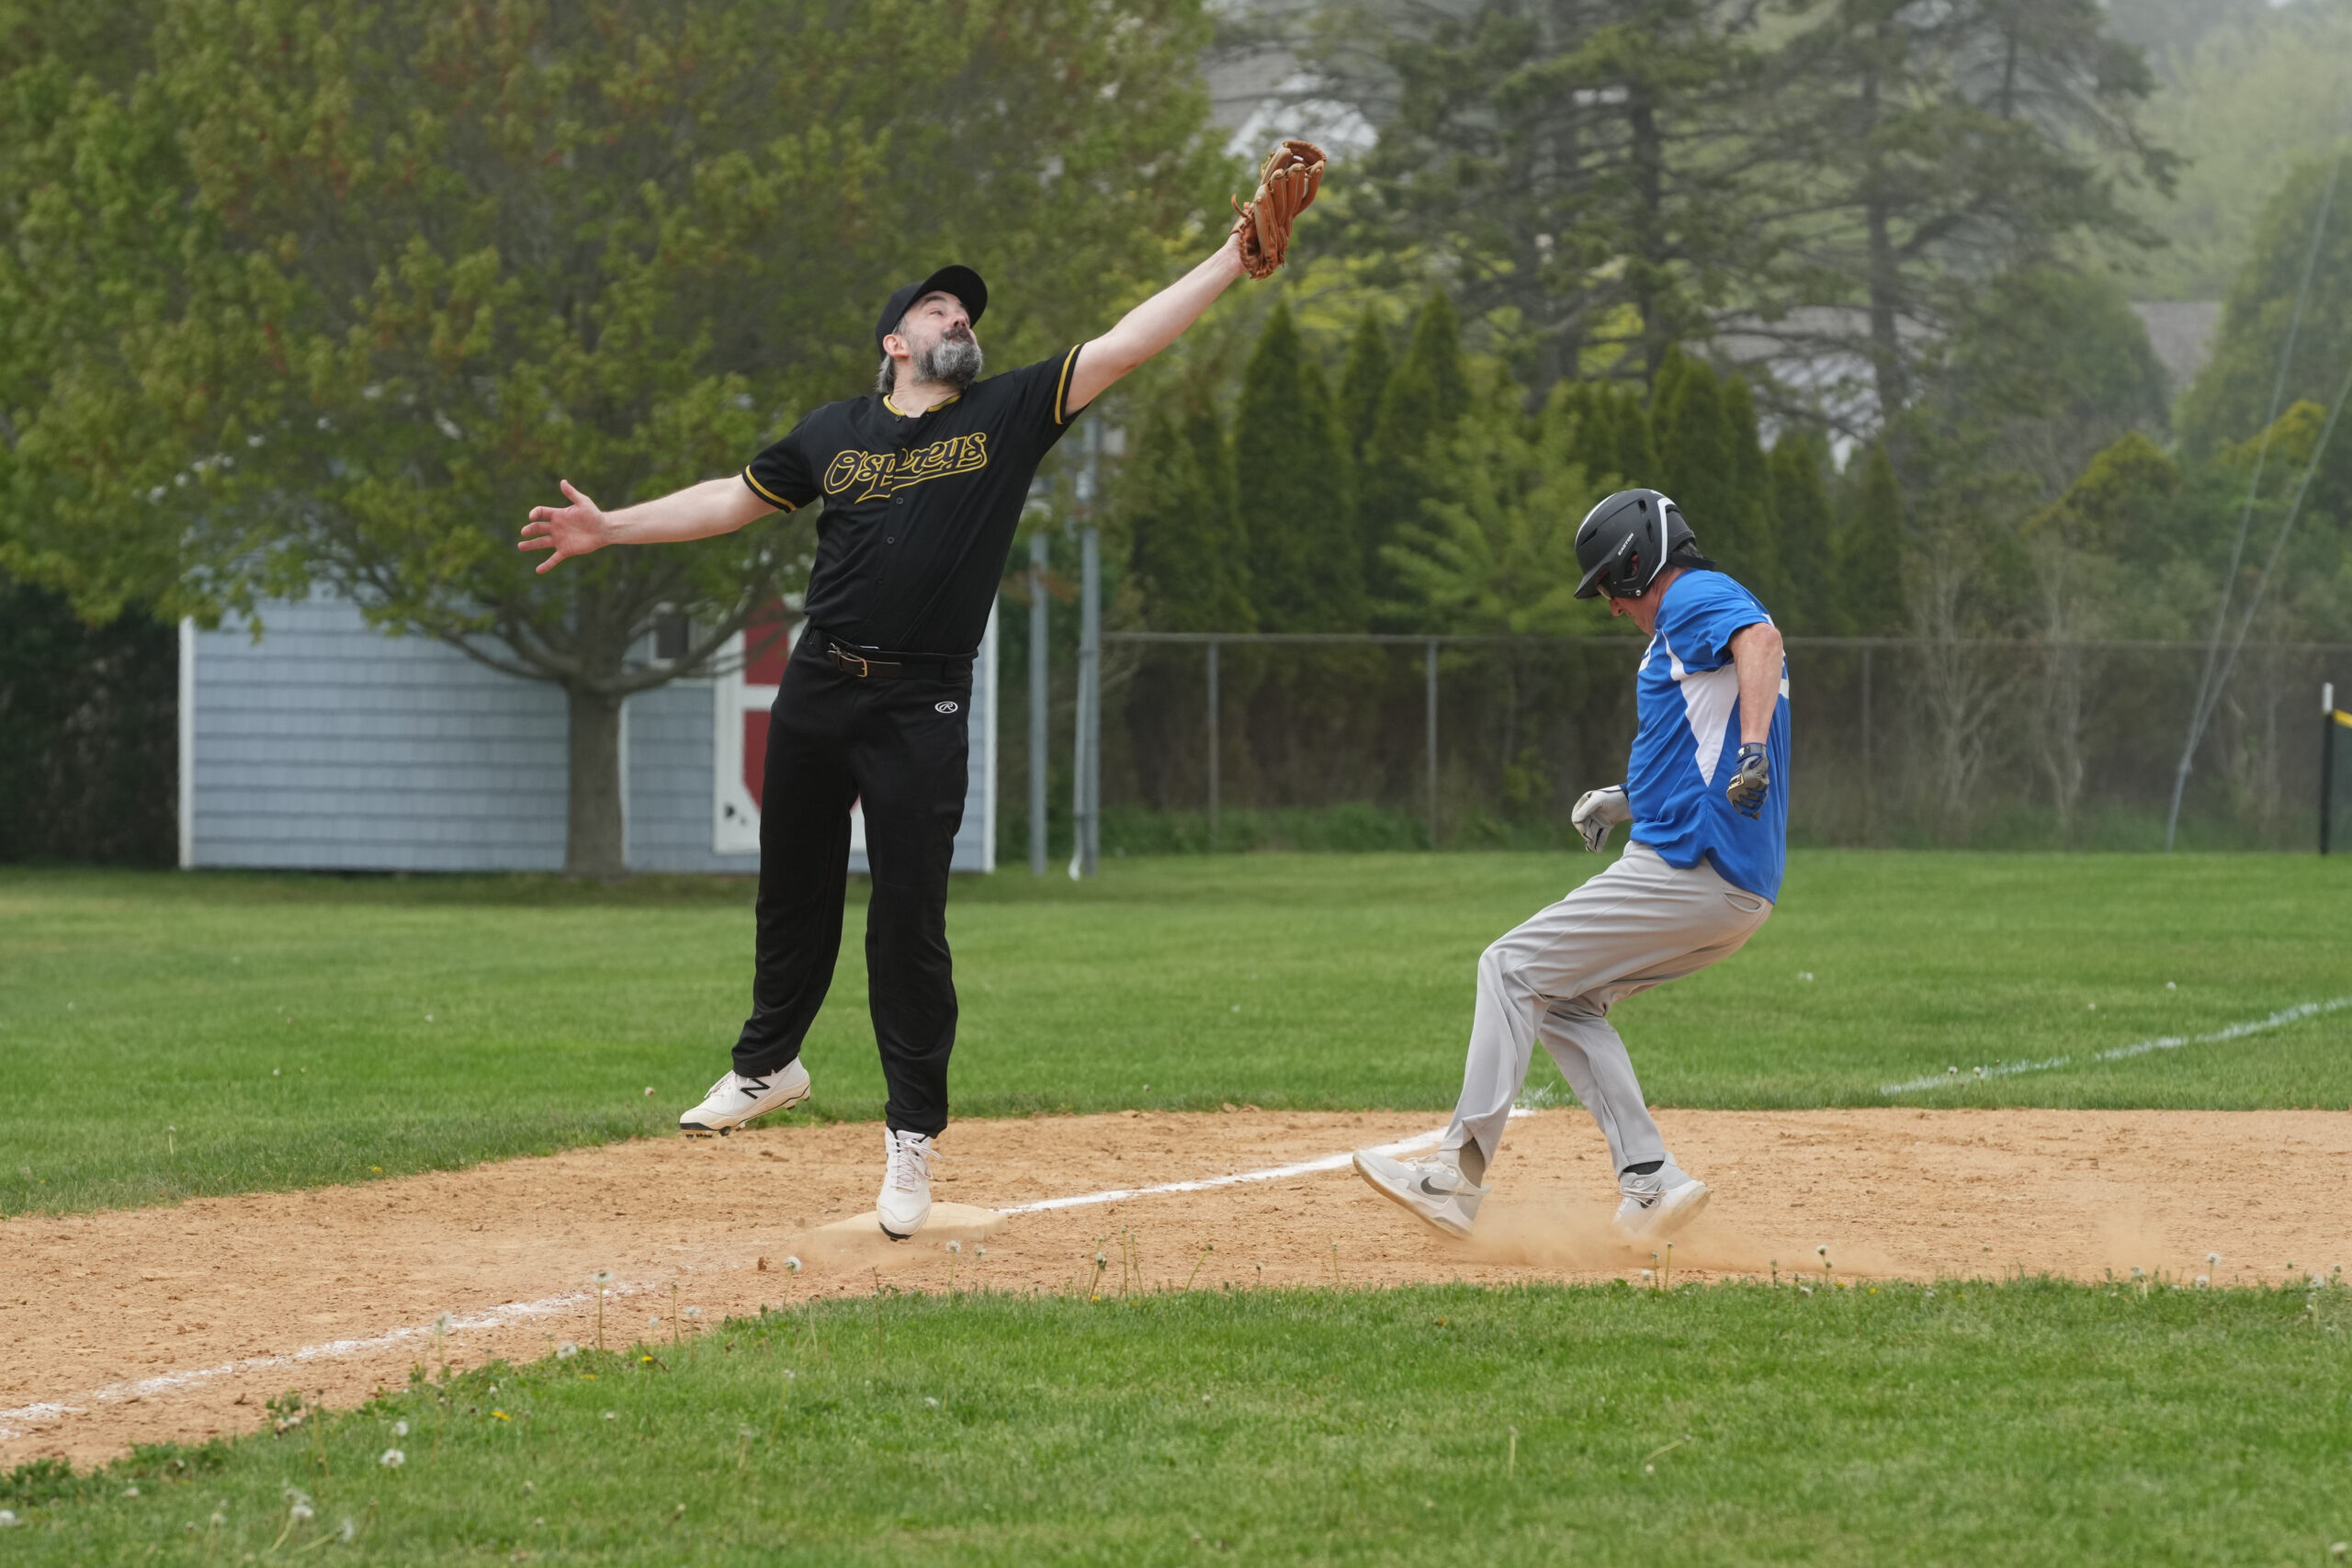 Hamptons Adult Hardball, a 30-and-over wood bat league based on the East End, opened its season on Sunday with a doubleheader of its four teams including the Harbor Kraken against the Southampton Brewers and the Sag Harbor Royals against the East End Ospreys.   RON ESPOSITO